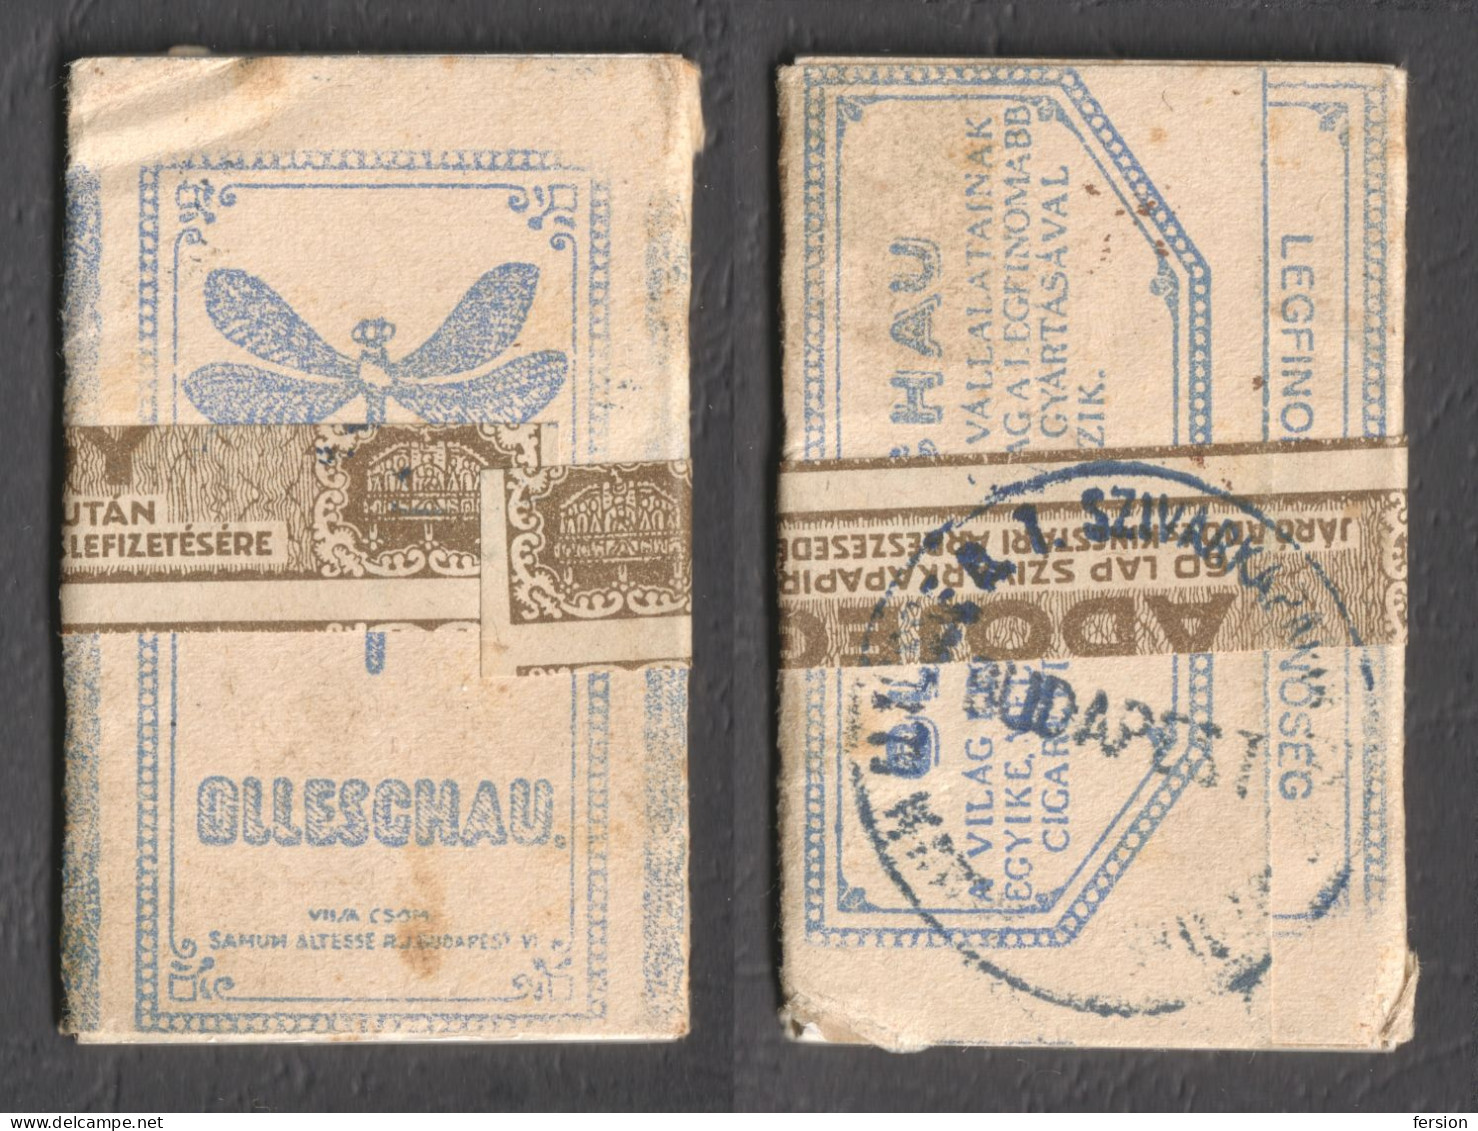 CIGARETTE TOBACCO Paper REVENUE Seal Fiscal Tax Stripe Hungary LABEL Cover Olleschau DRAGONFLY 1930 UNUSED Full Paper - Tabac